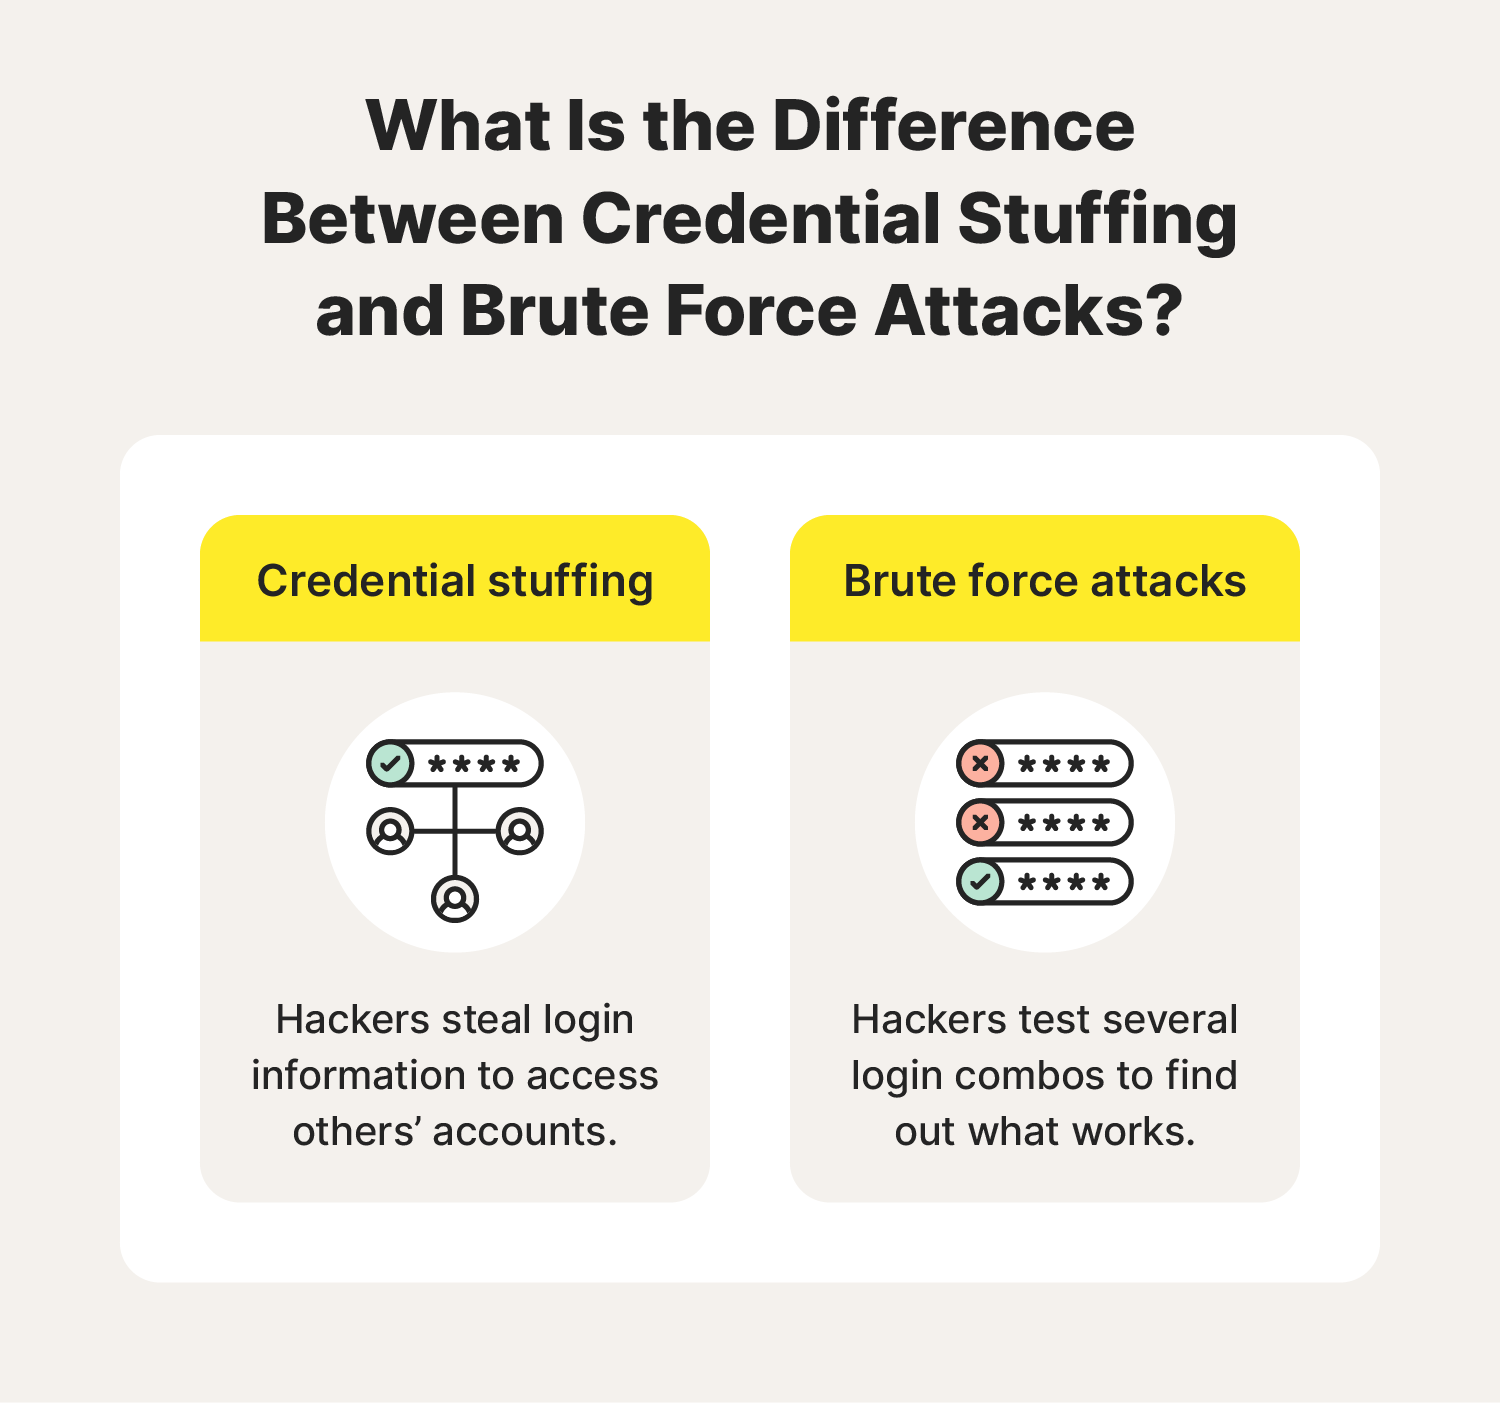 A comparison explaining the differences between credential stuffing and brute force attacks.